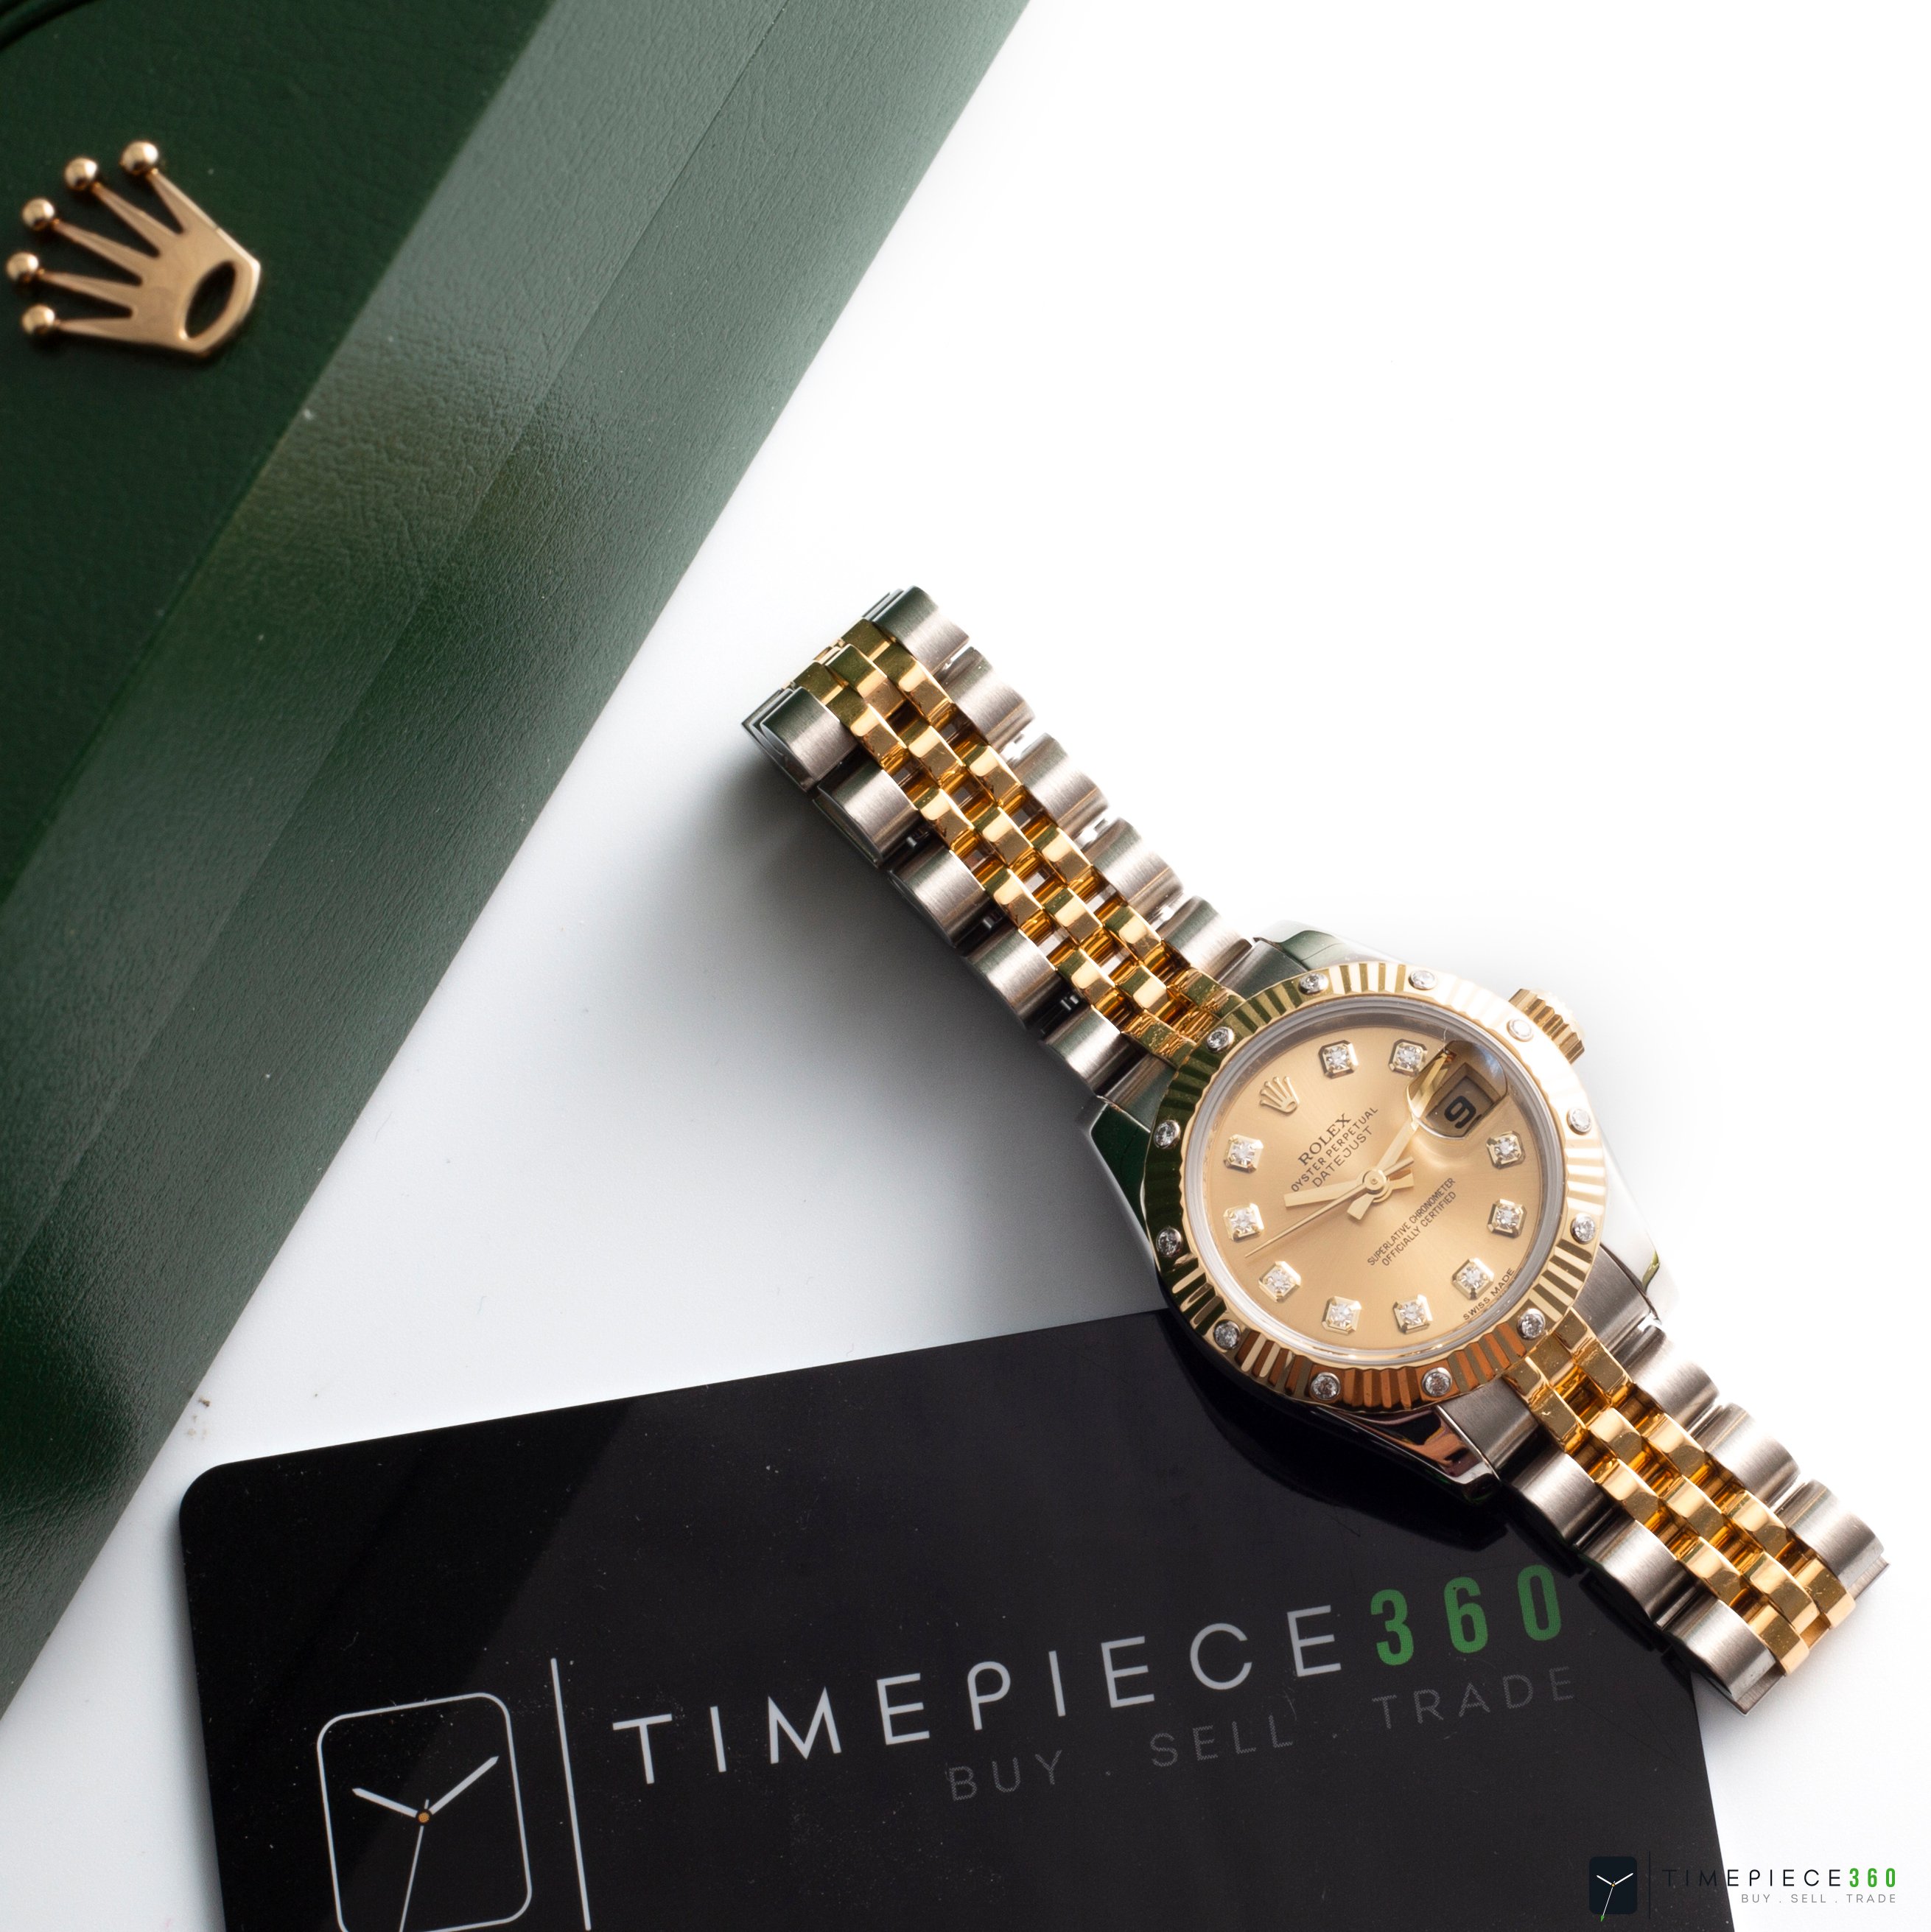 Timepiece360 Authenticity Certificate By Certified Watchmakers